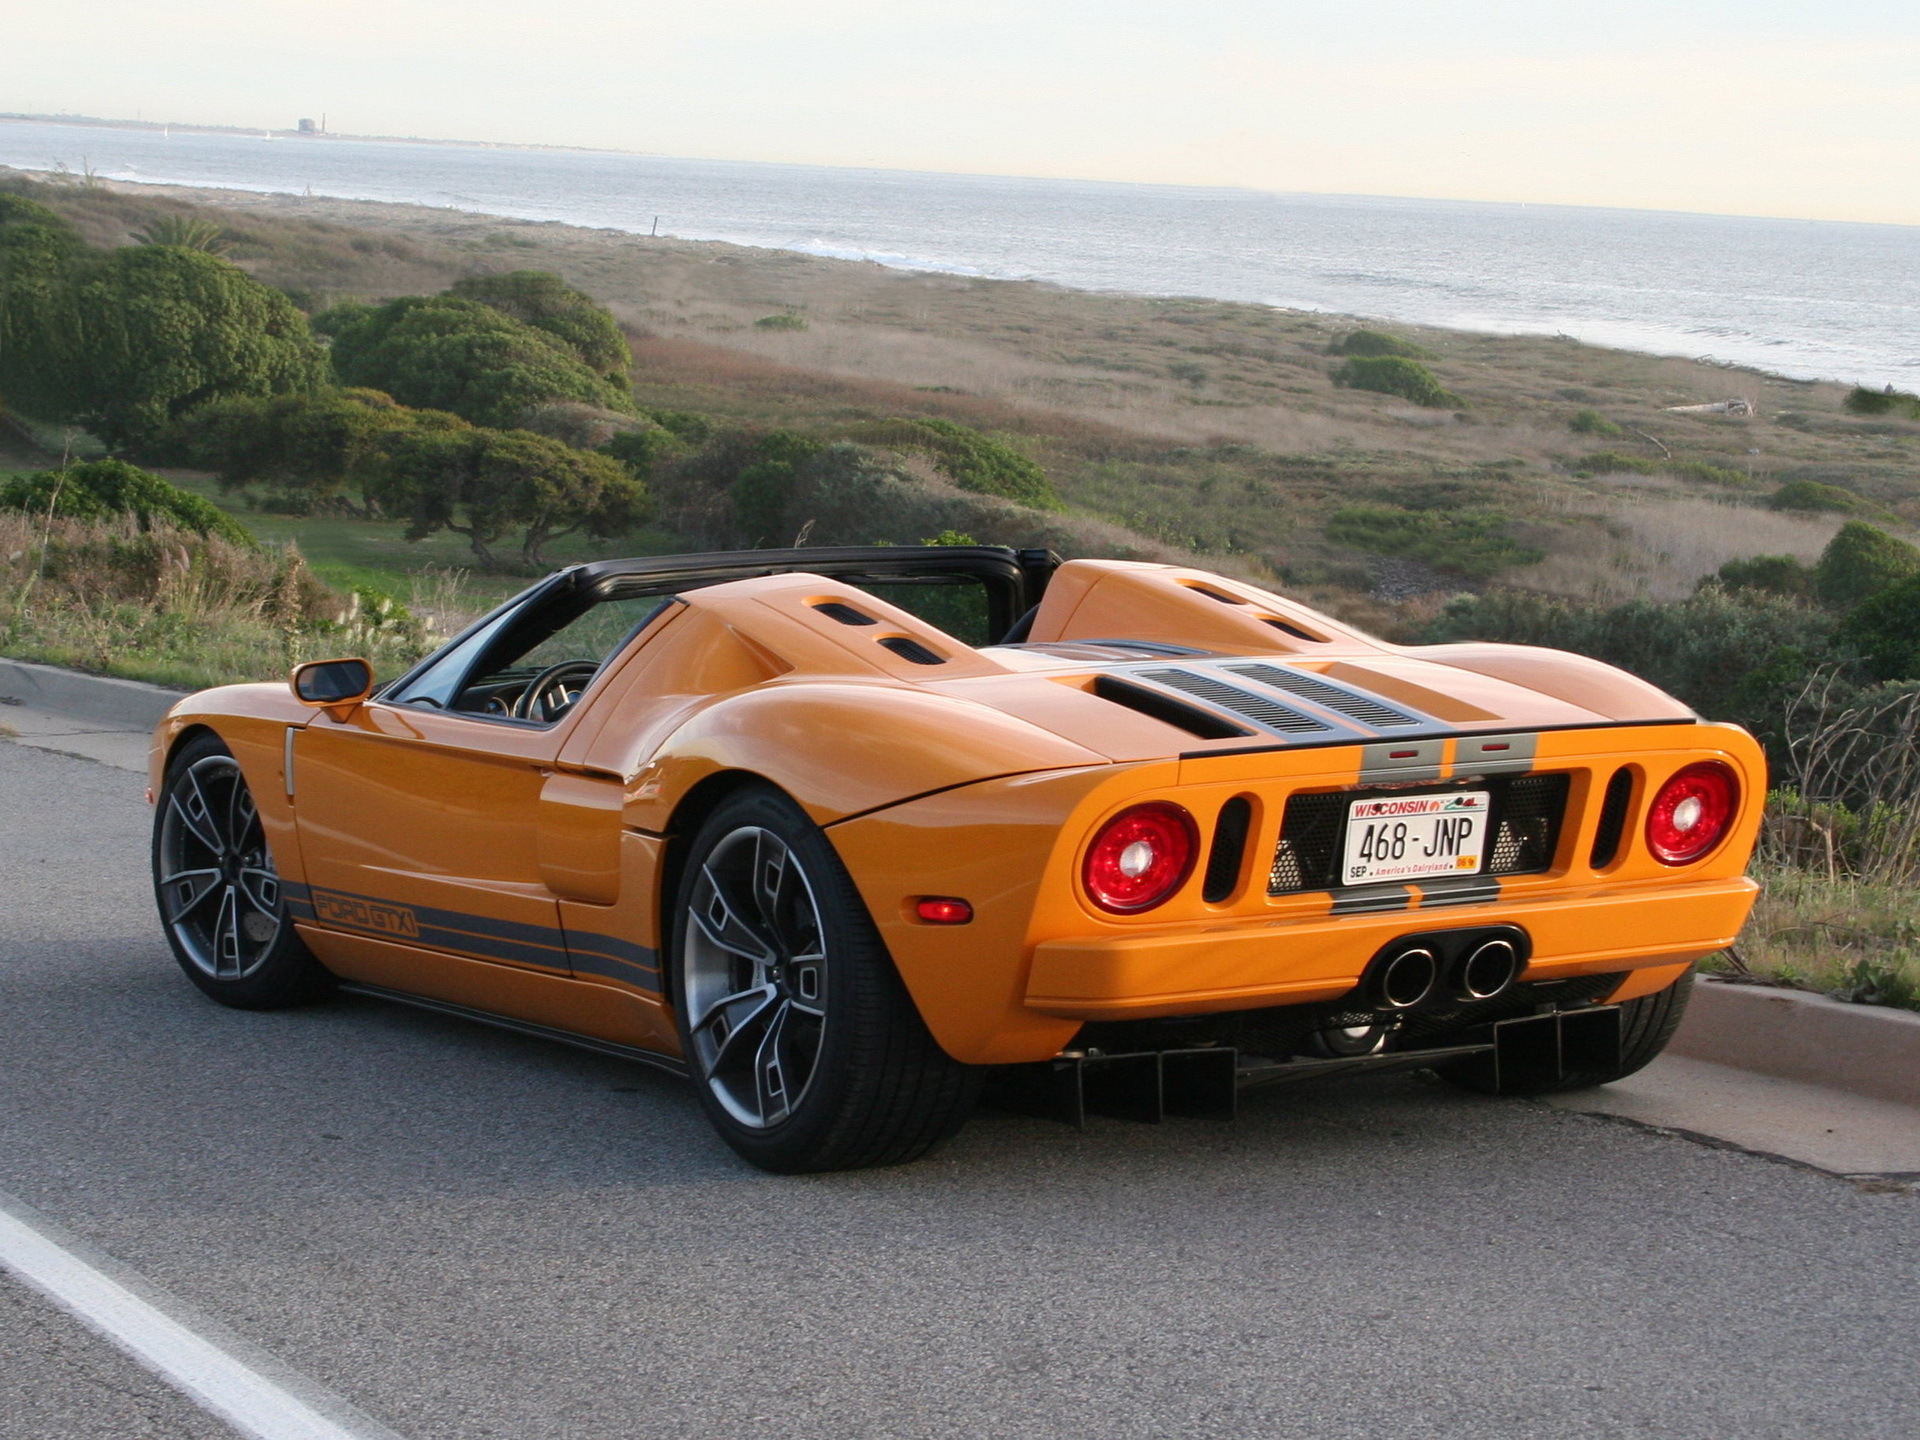 Ford Gt - Ford Gt Roadster 2006 - HD Wallpaper 